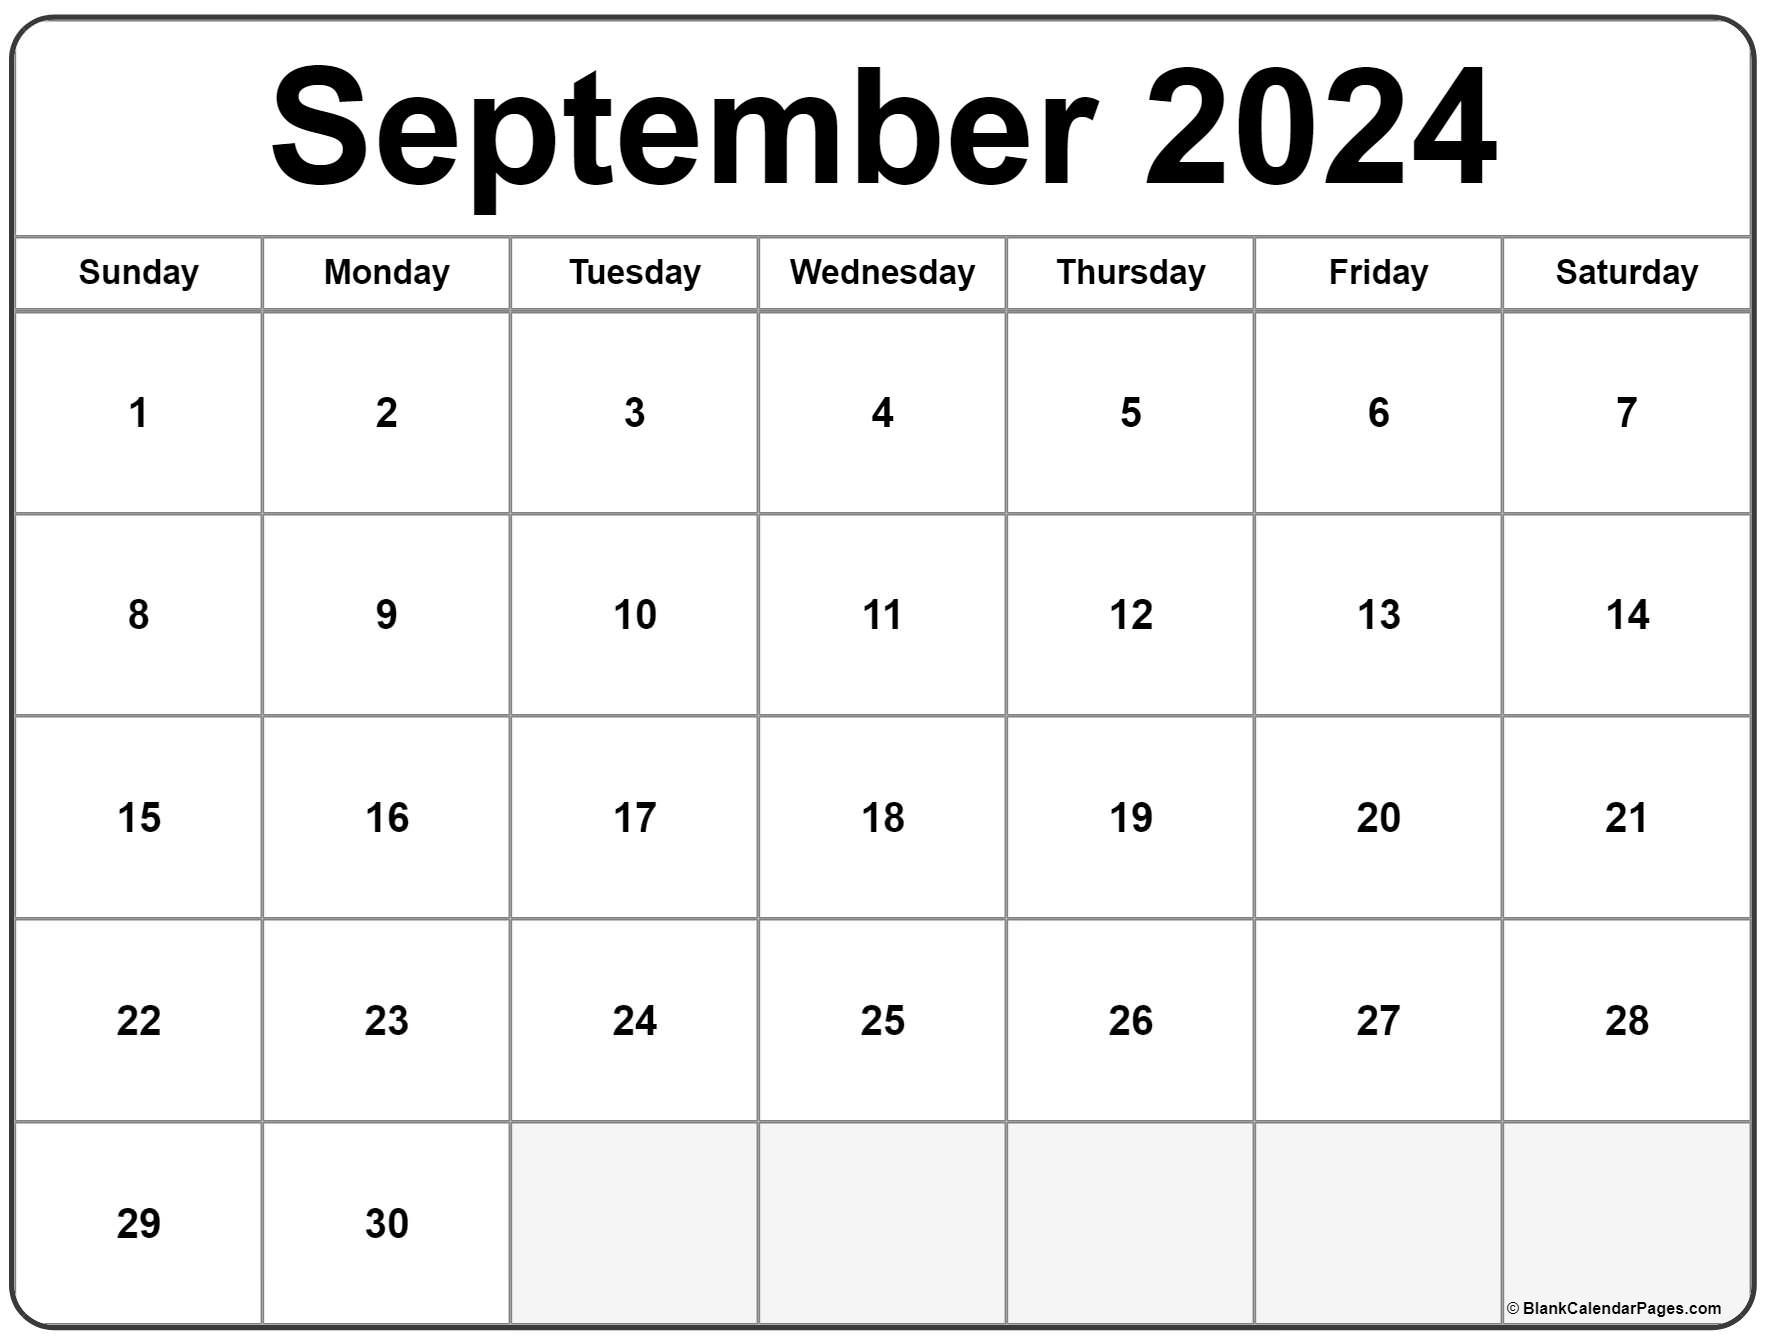 Printable Calendar 2024 September Your Guide to Creating a Stylish and